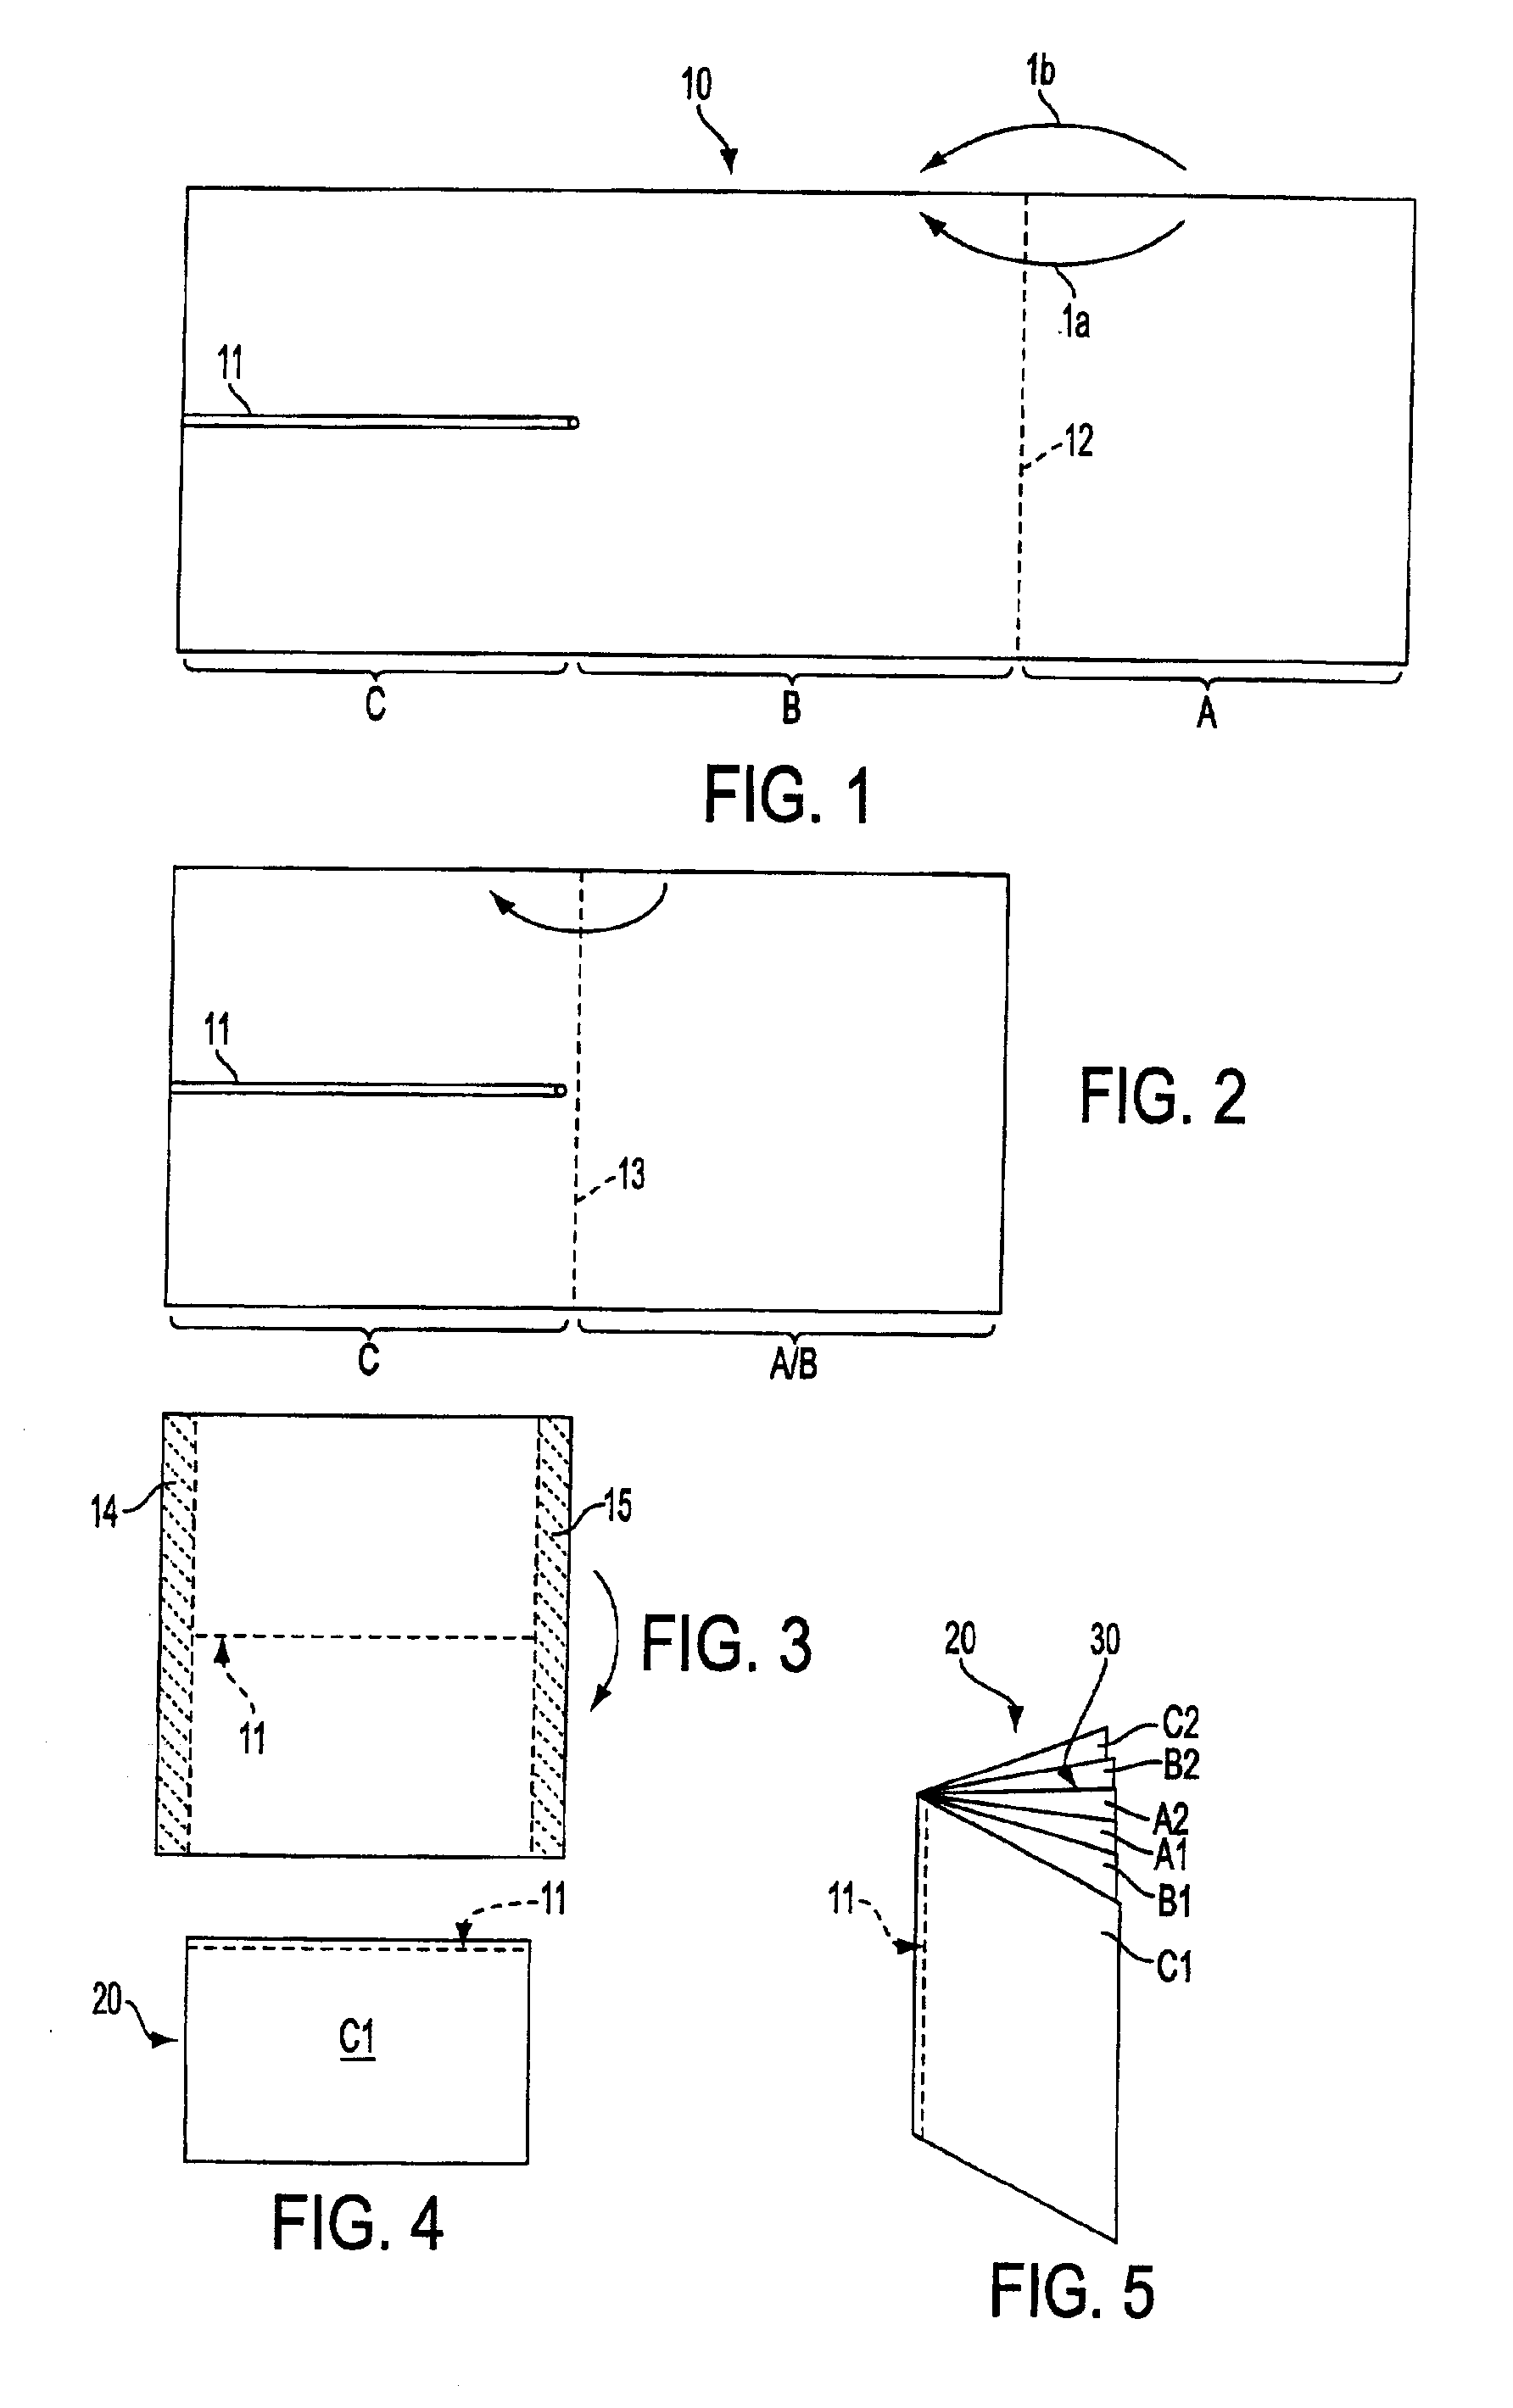 Method of manufacturing a multi-page booklet from a single sheet